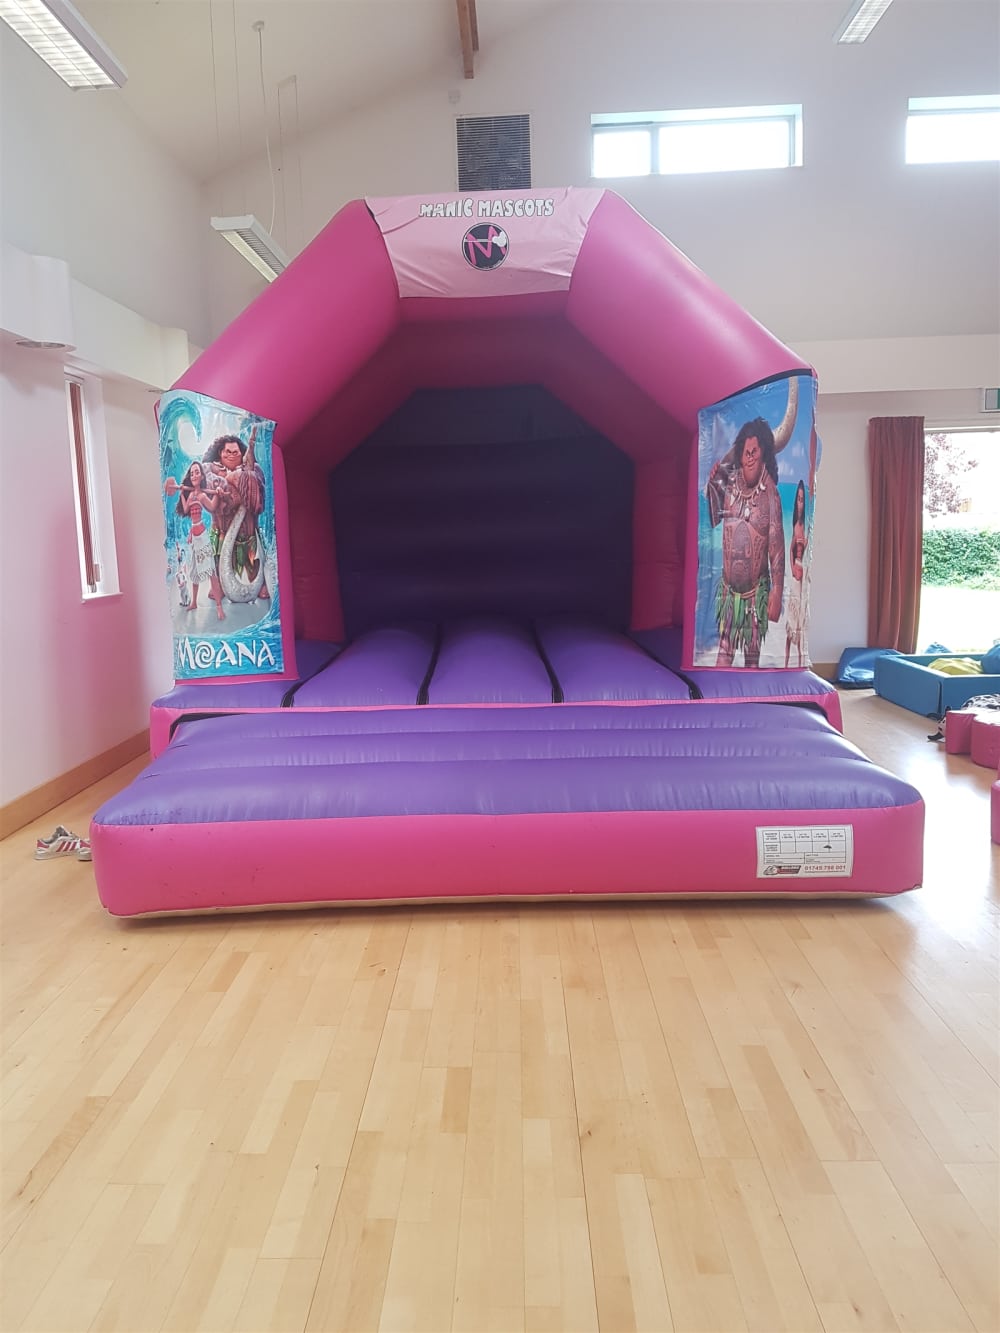 Moana Bouncy Castle Bouncy Castle Hire And Mascots Hire In Rotherham Sheffield Doncaster Worksop